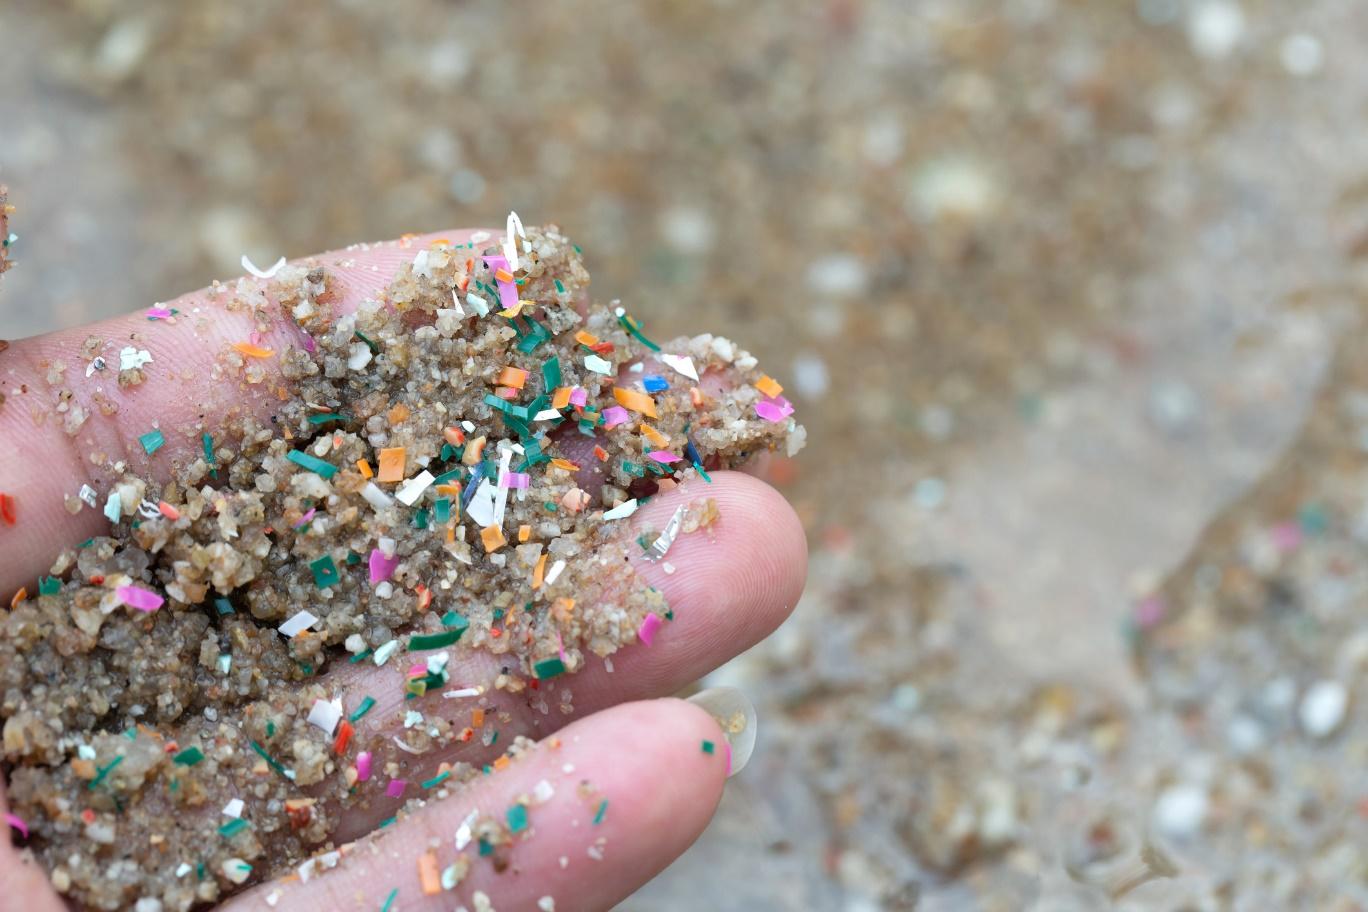 A picture showing a handful of sand, containing small bits of plastic. The article examines the harmful effects of microplastics.